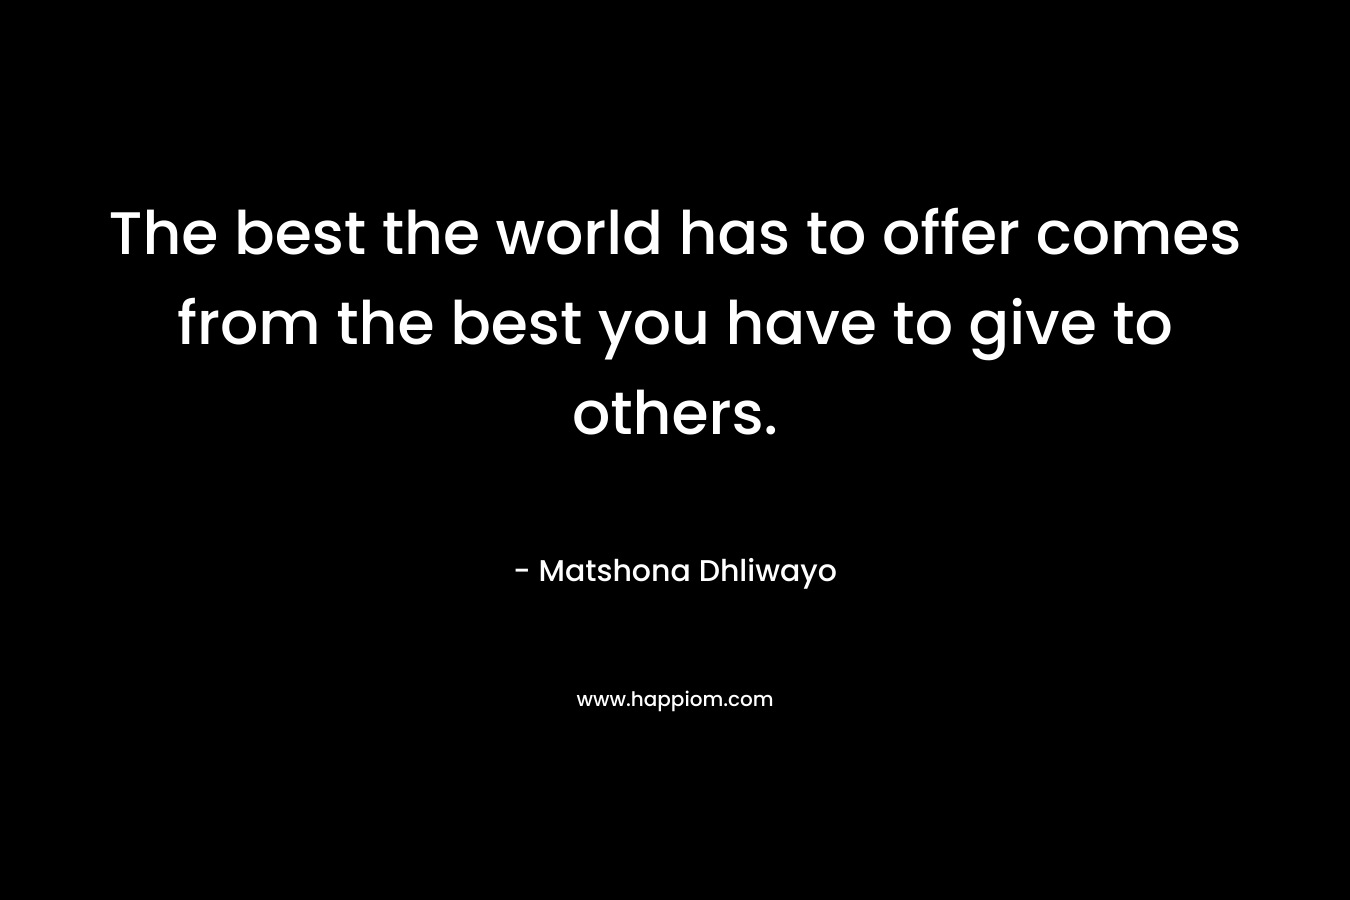 The best the world has to offer comes from the best you have to give to others.